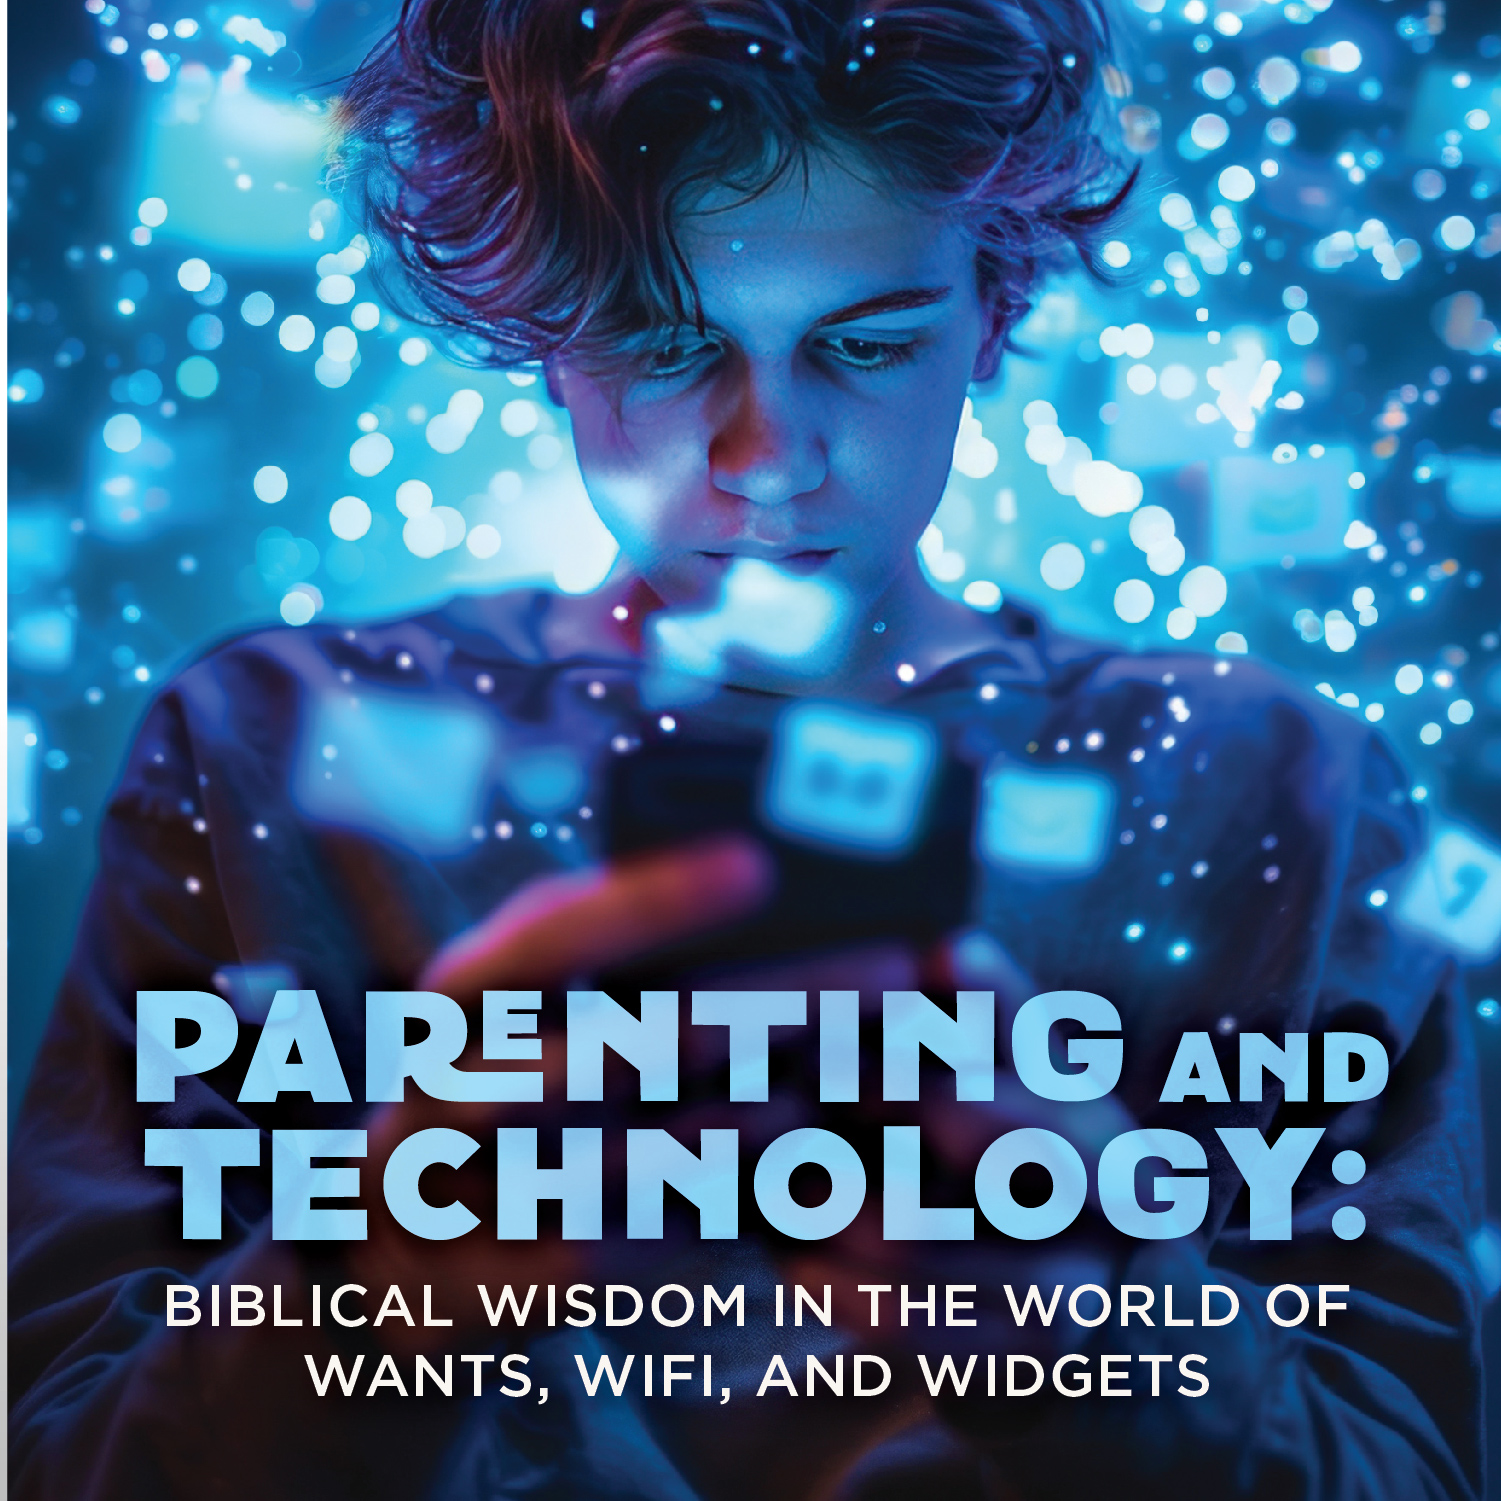 Parenting and Technology: Biblical Wisdom in a World of Wants, WiFi, and Widgets